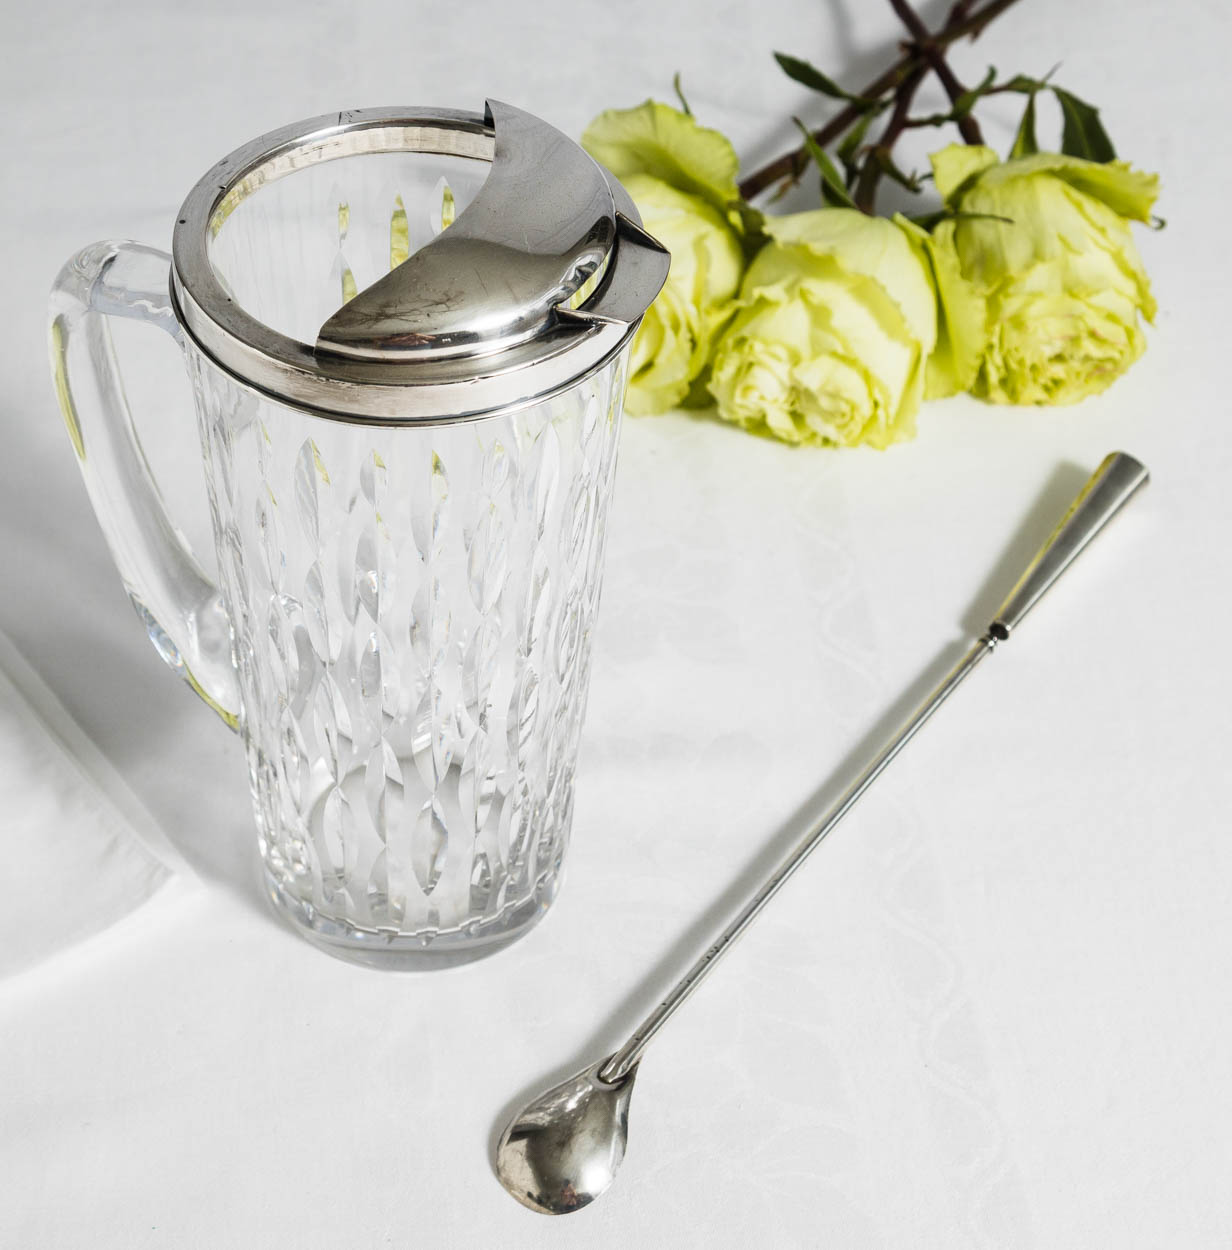 Authentic Tiffany & Co. Sterling Silver Pouring Rim Glass Cocktail Pitcher